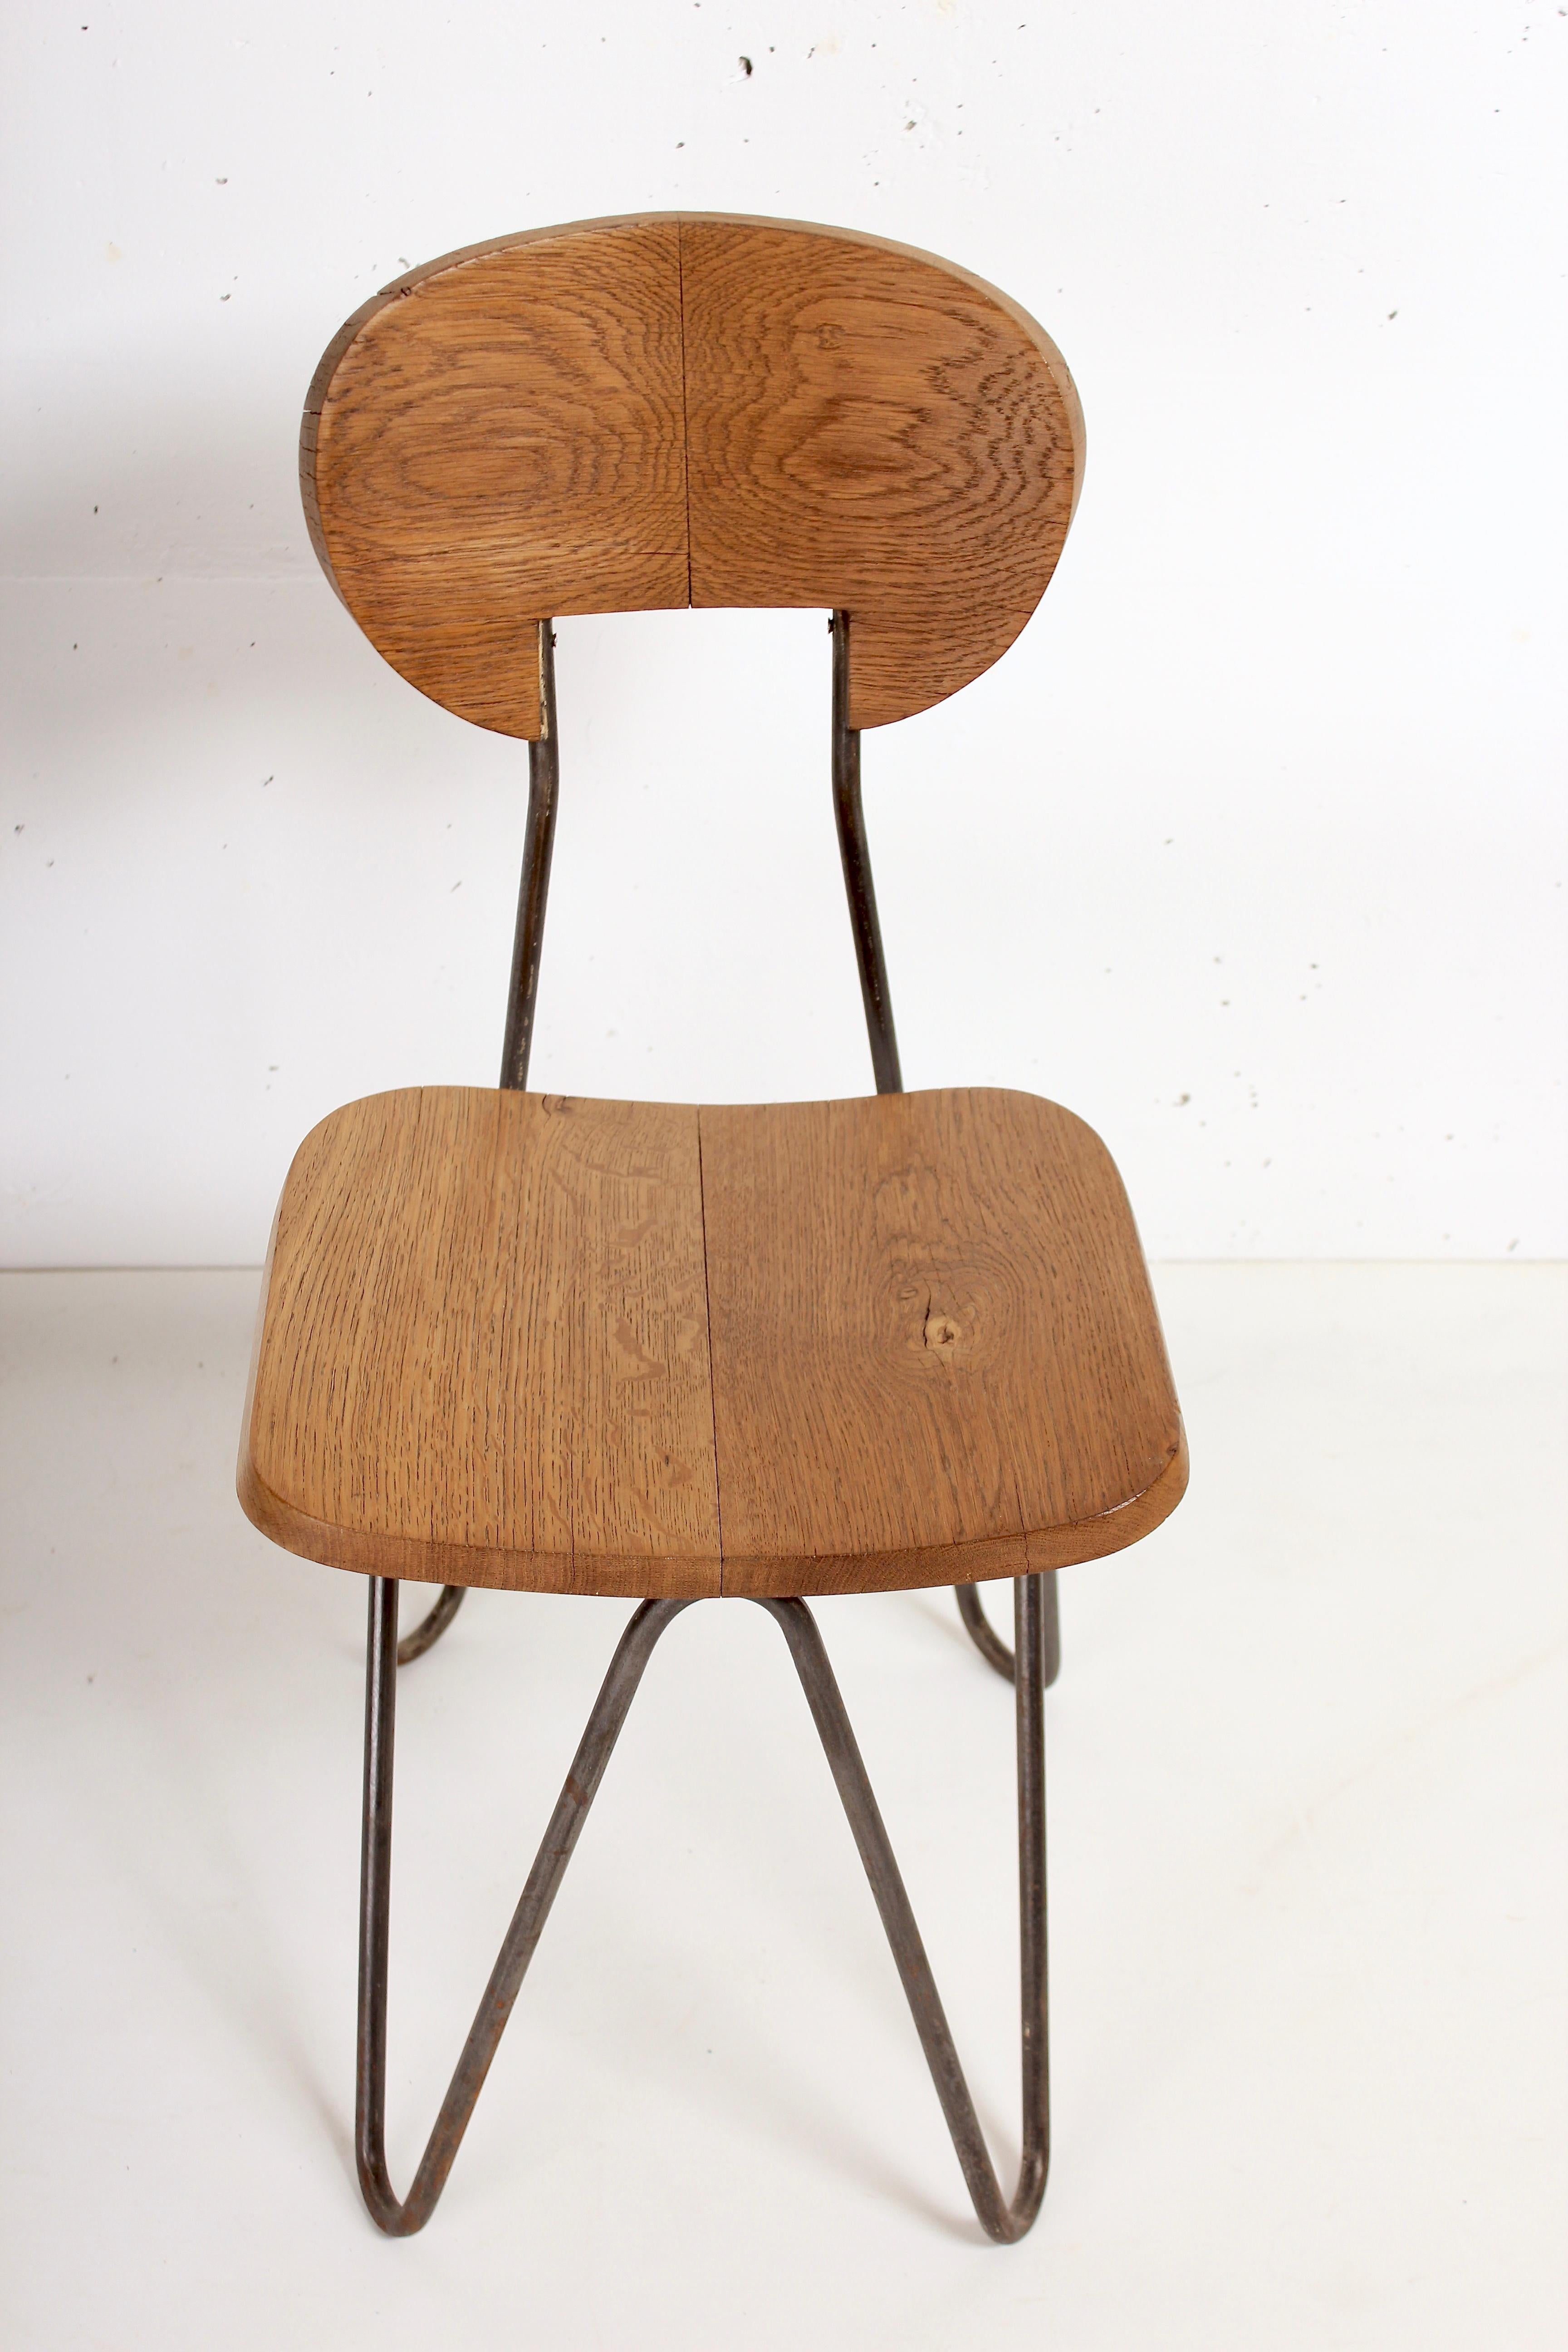 Mid-Century Modern W Chair by Cesar Janello for Raoul Guys Aa Éditions, 1947